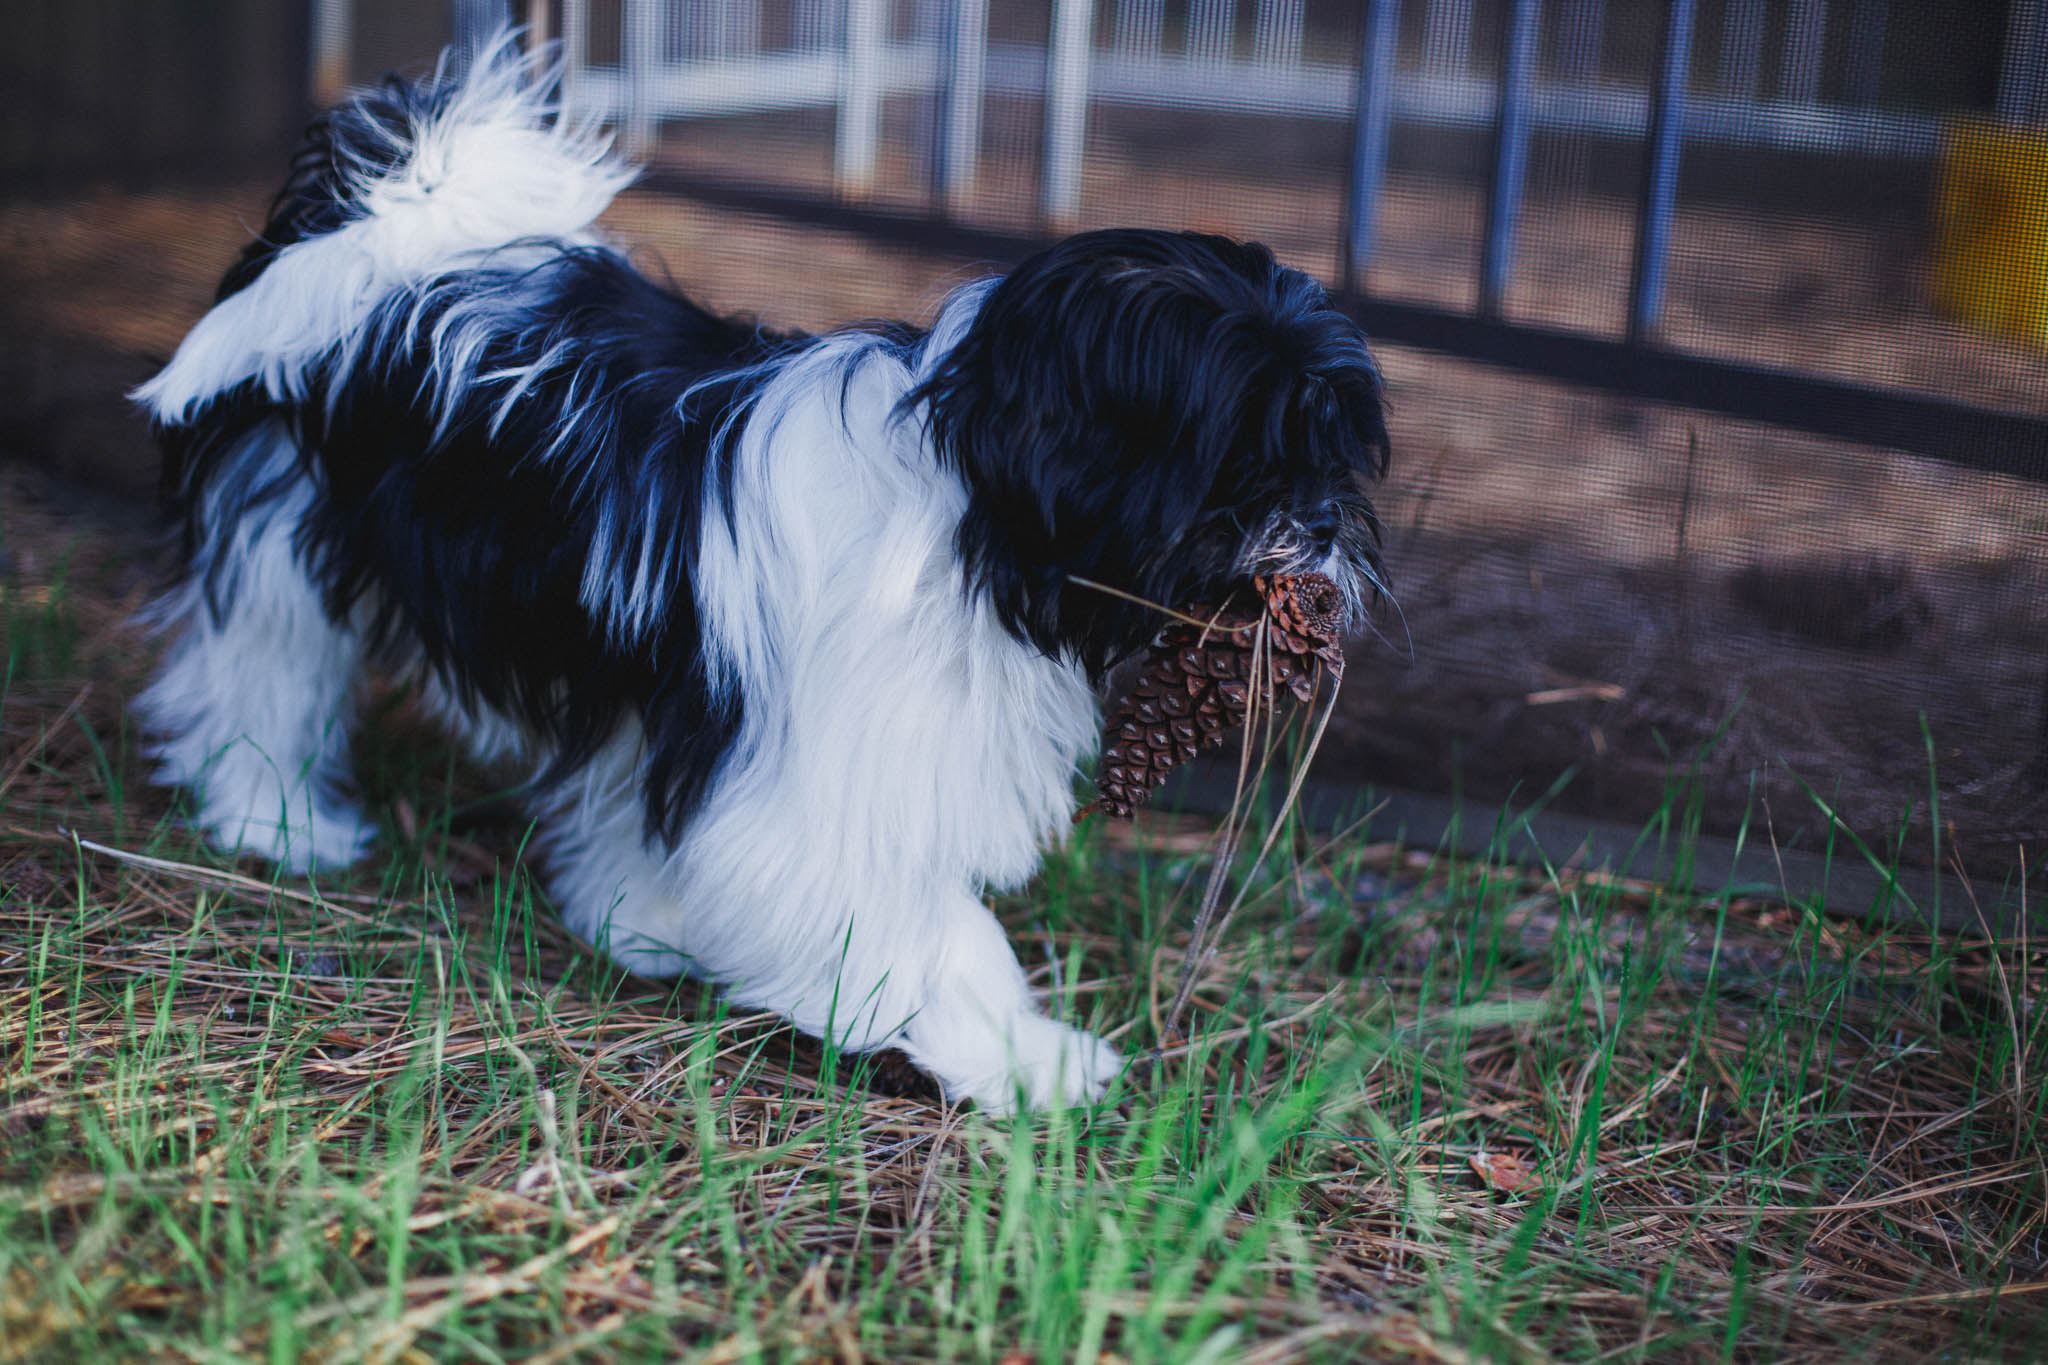 Lhasa Apso Puppy carrying a pine cone